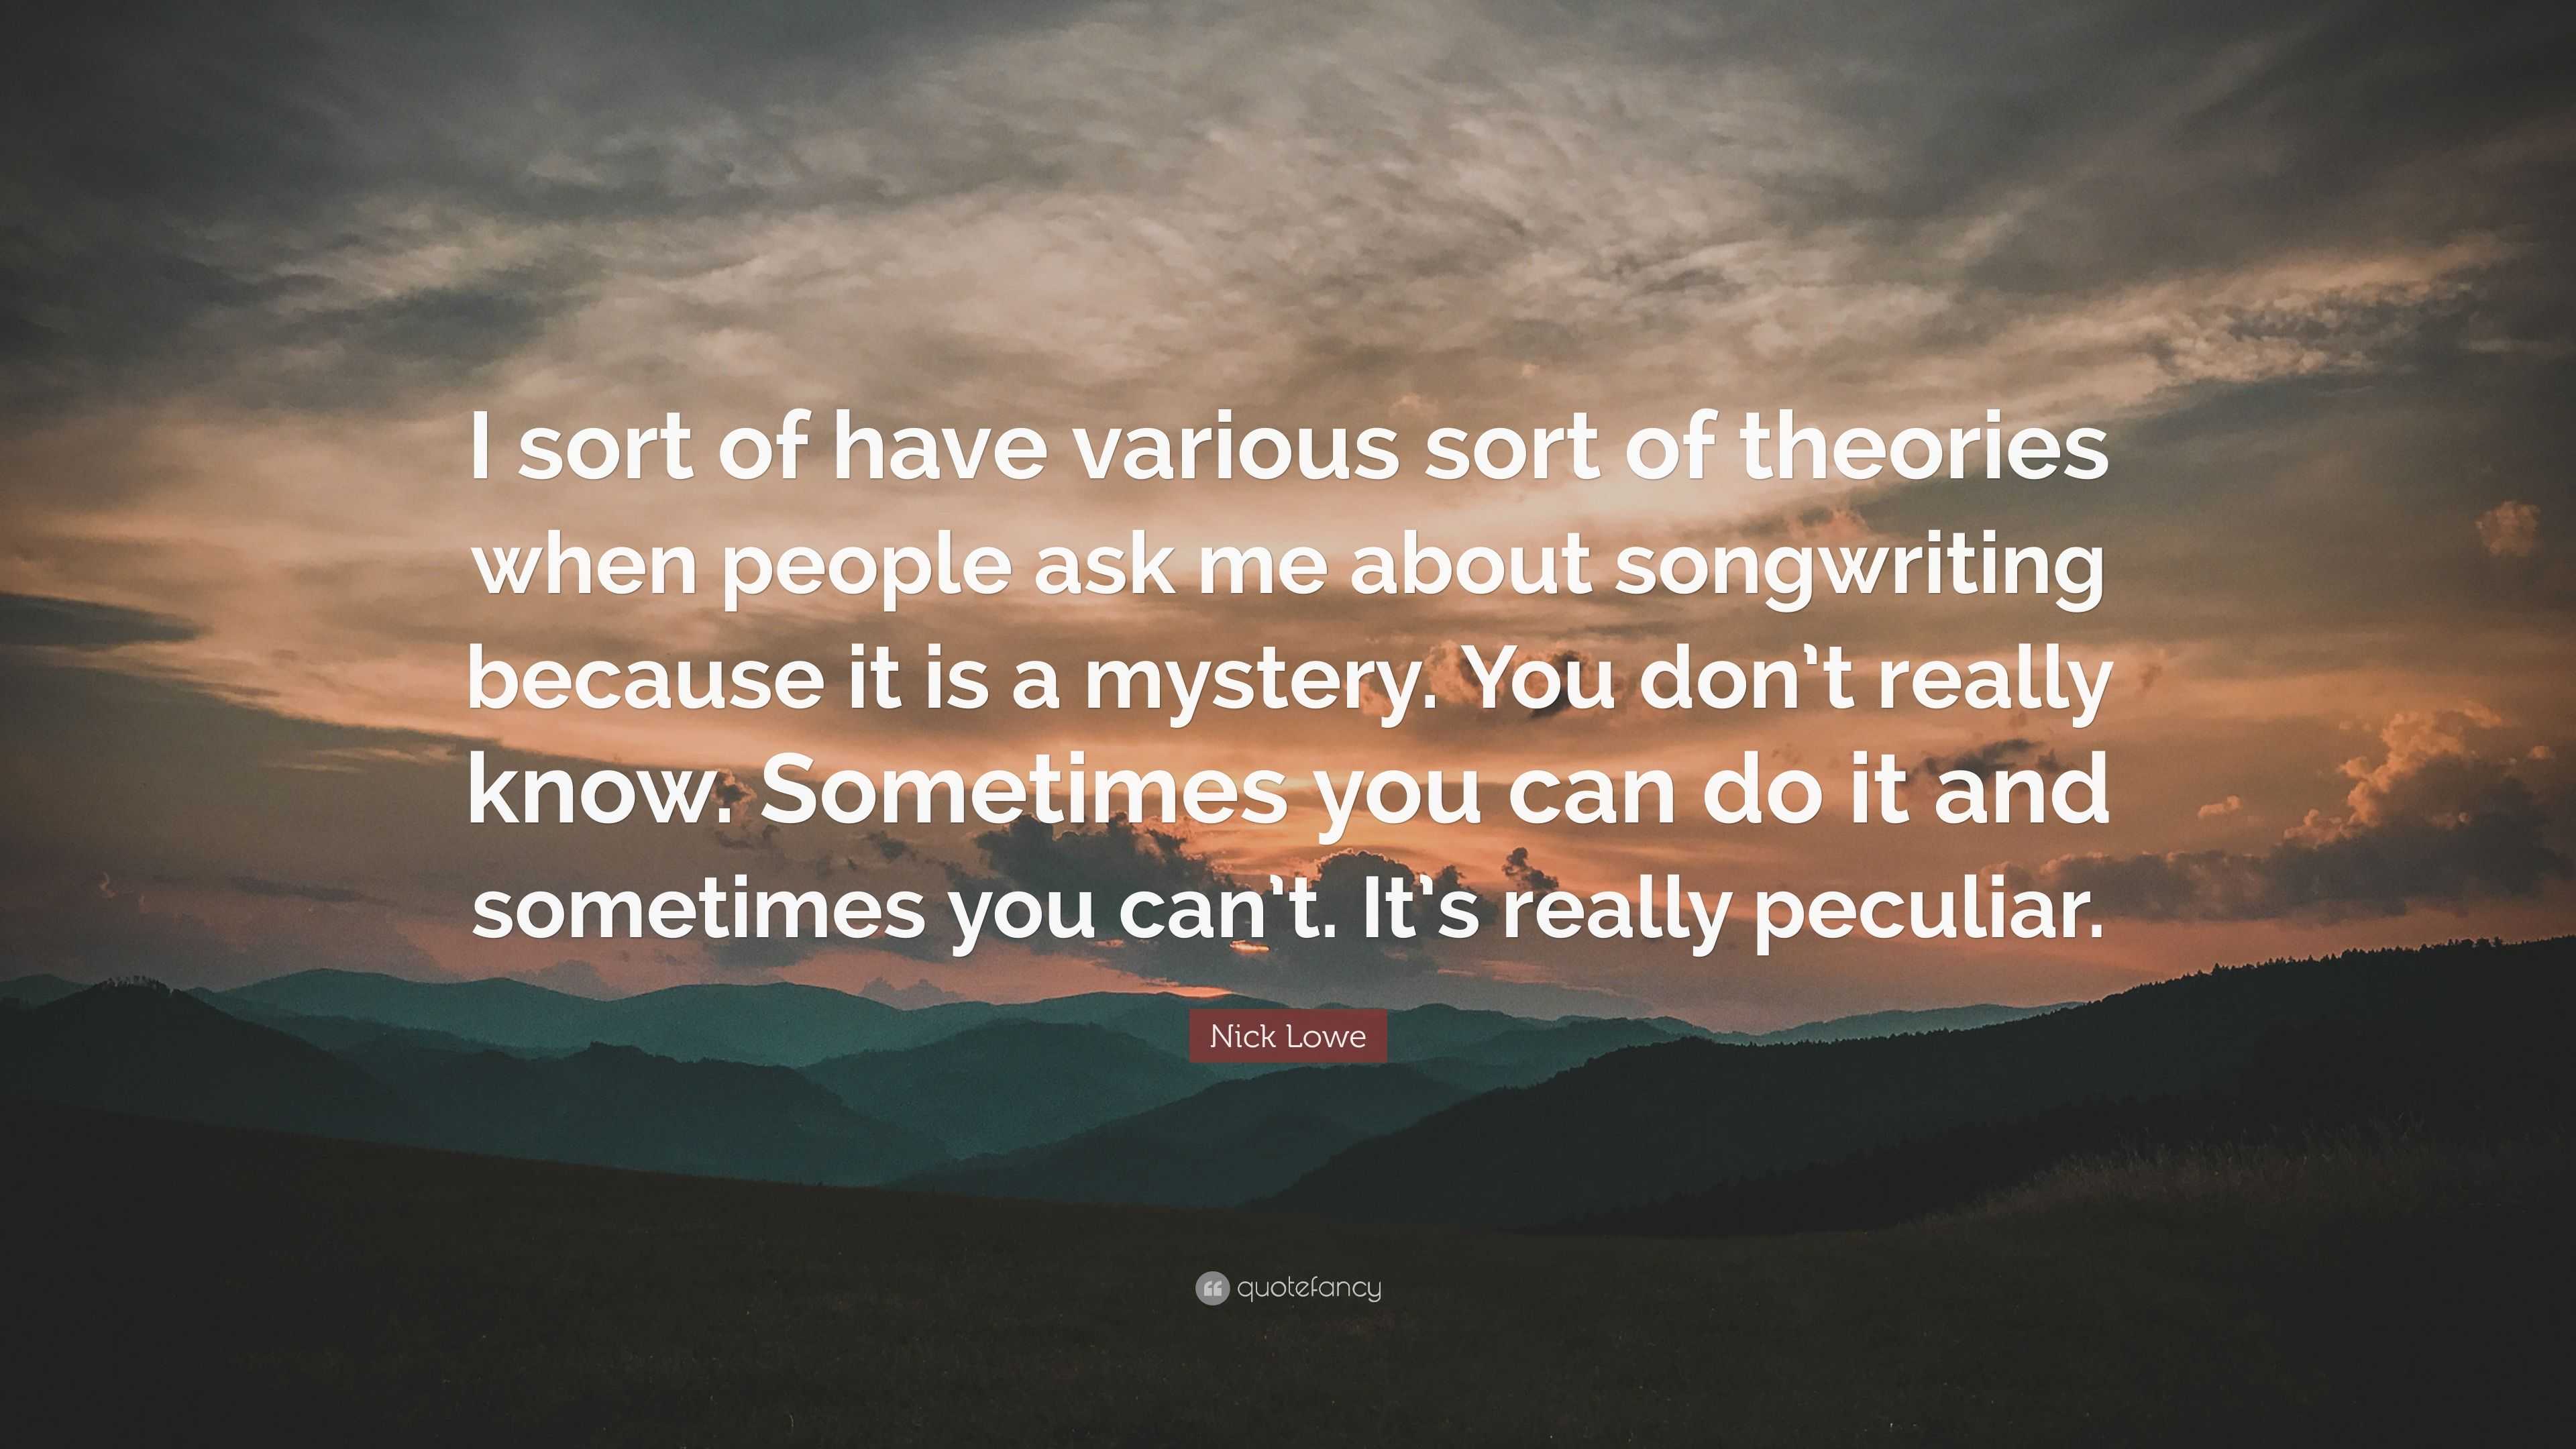 Nick Lowe Quote: “I sort of have various sort of theories when people ...